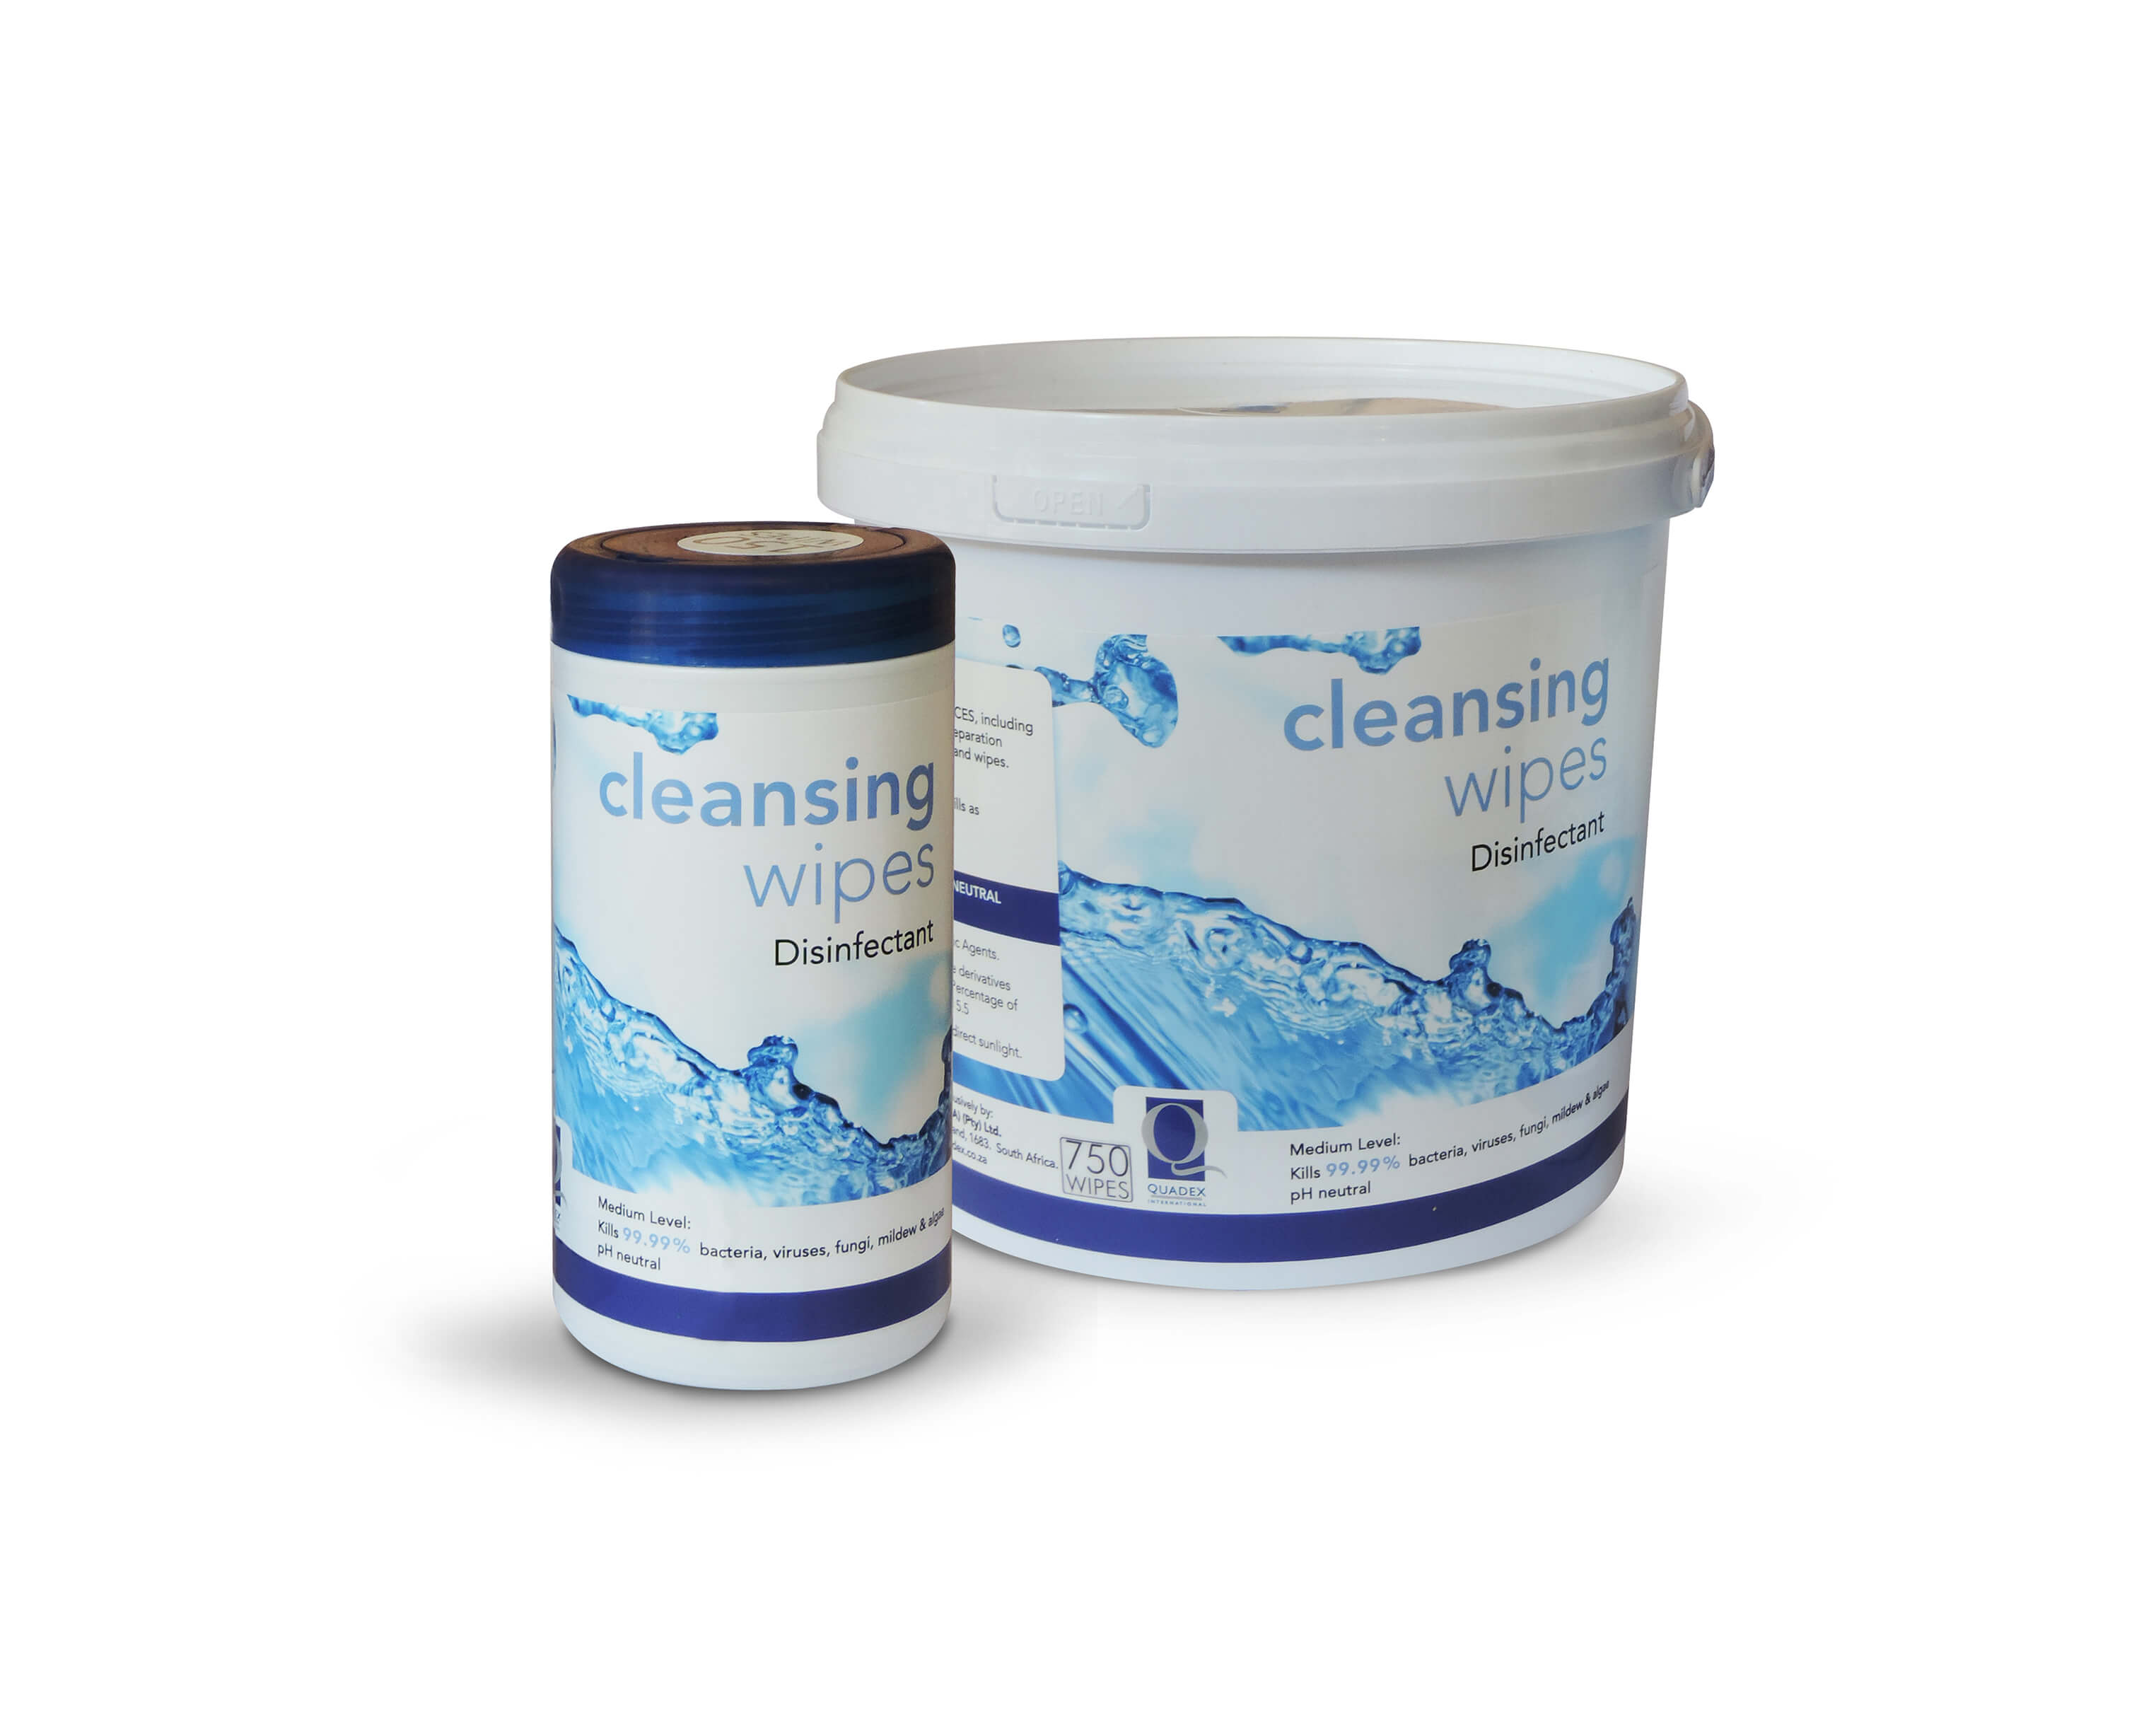 CLEANSING WIPES - ALL PURPOSE MEDIUM LEVEL DISINFECTANT WIPES